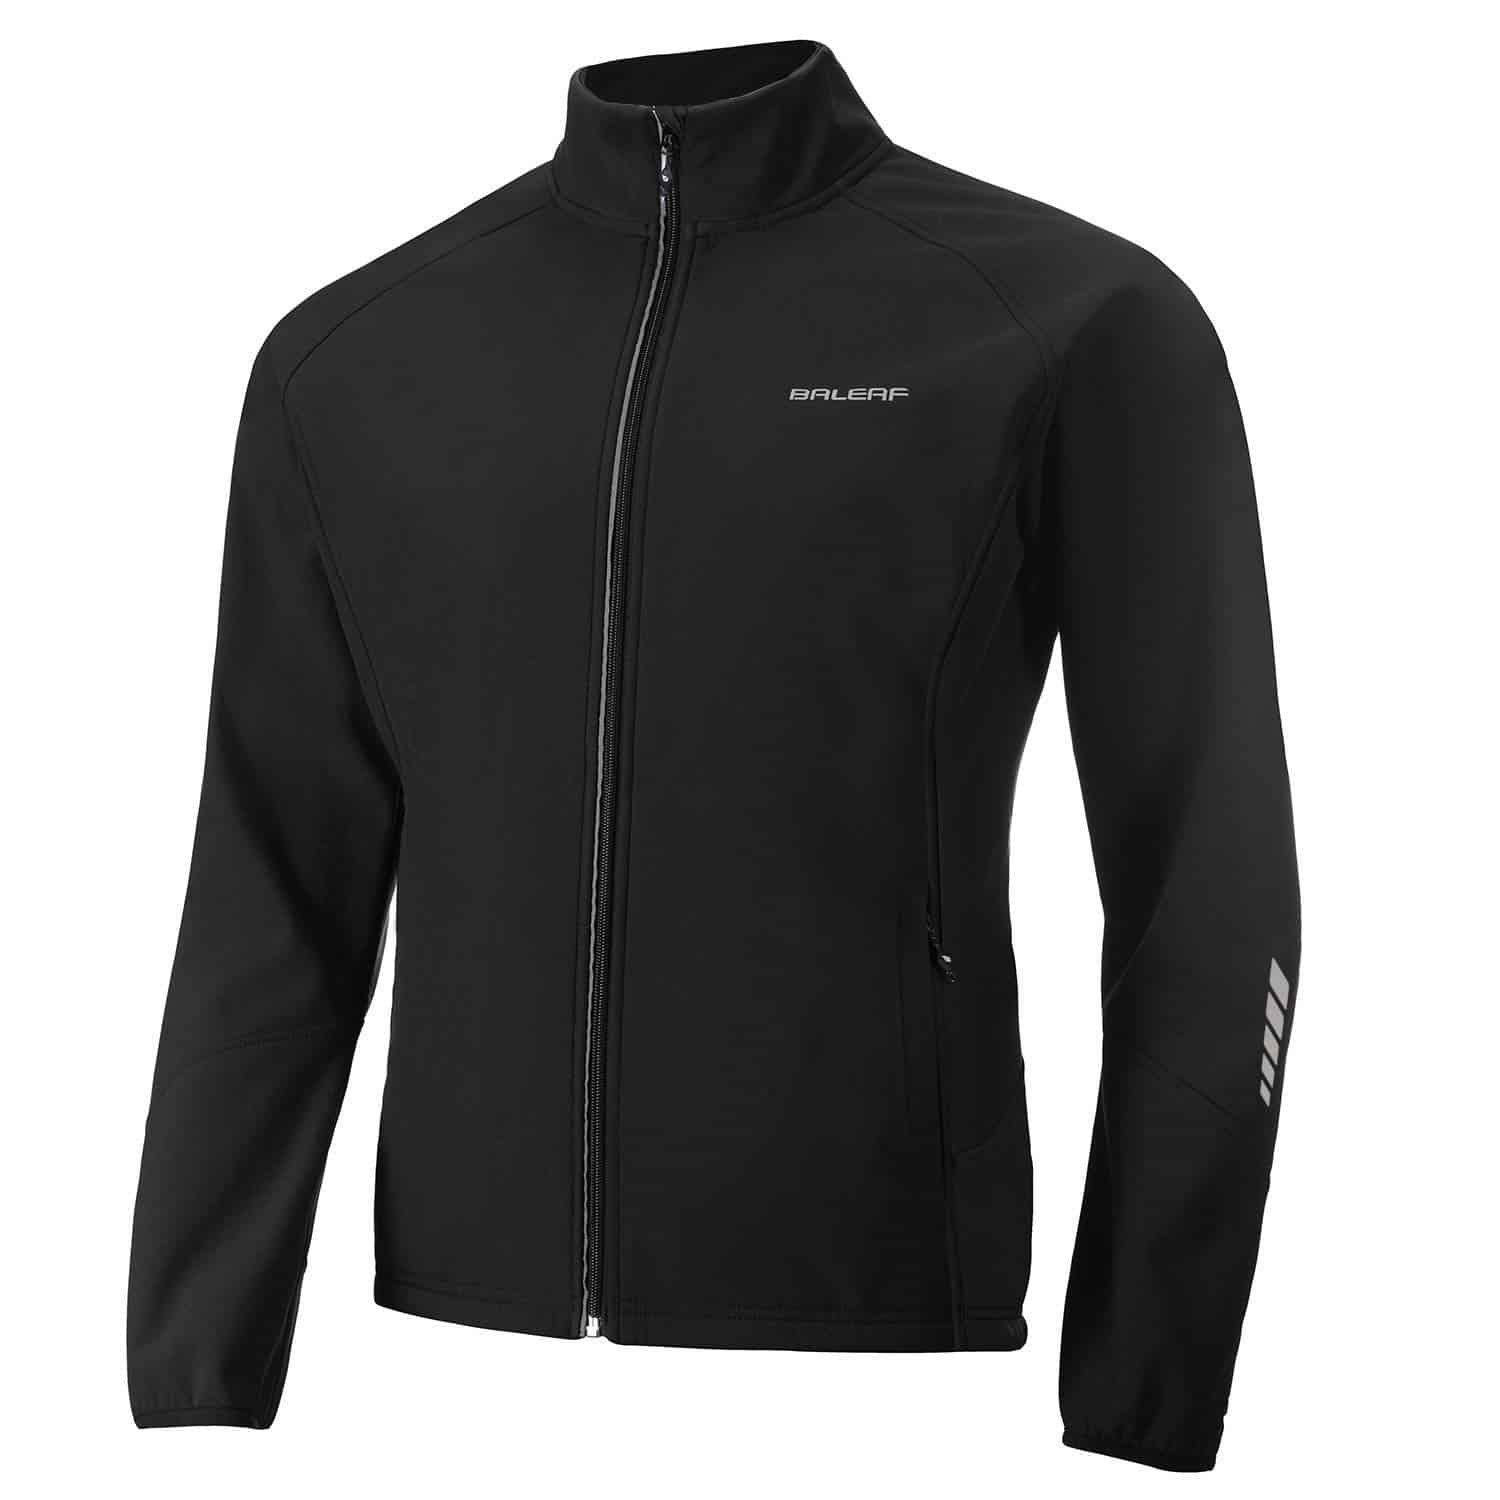 Top 10 Best Cycling Jackets in 2023 Reviews | Guide